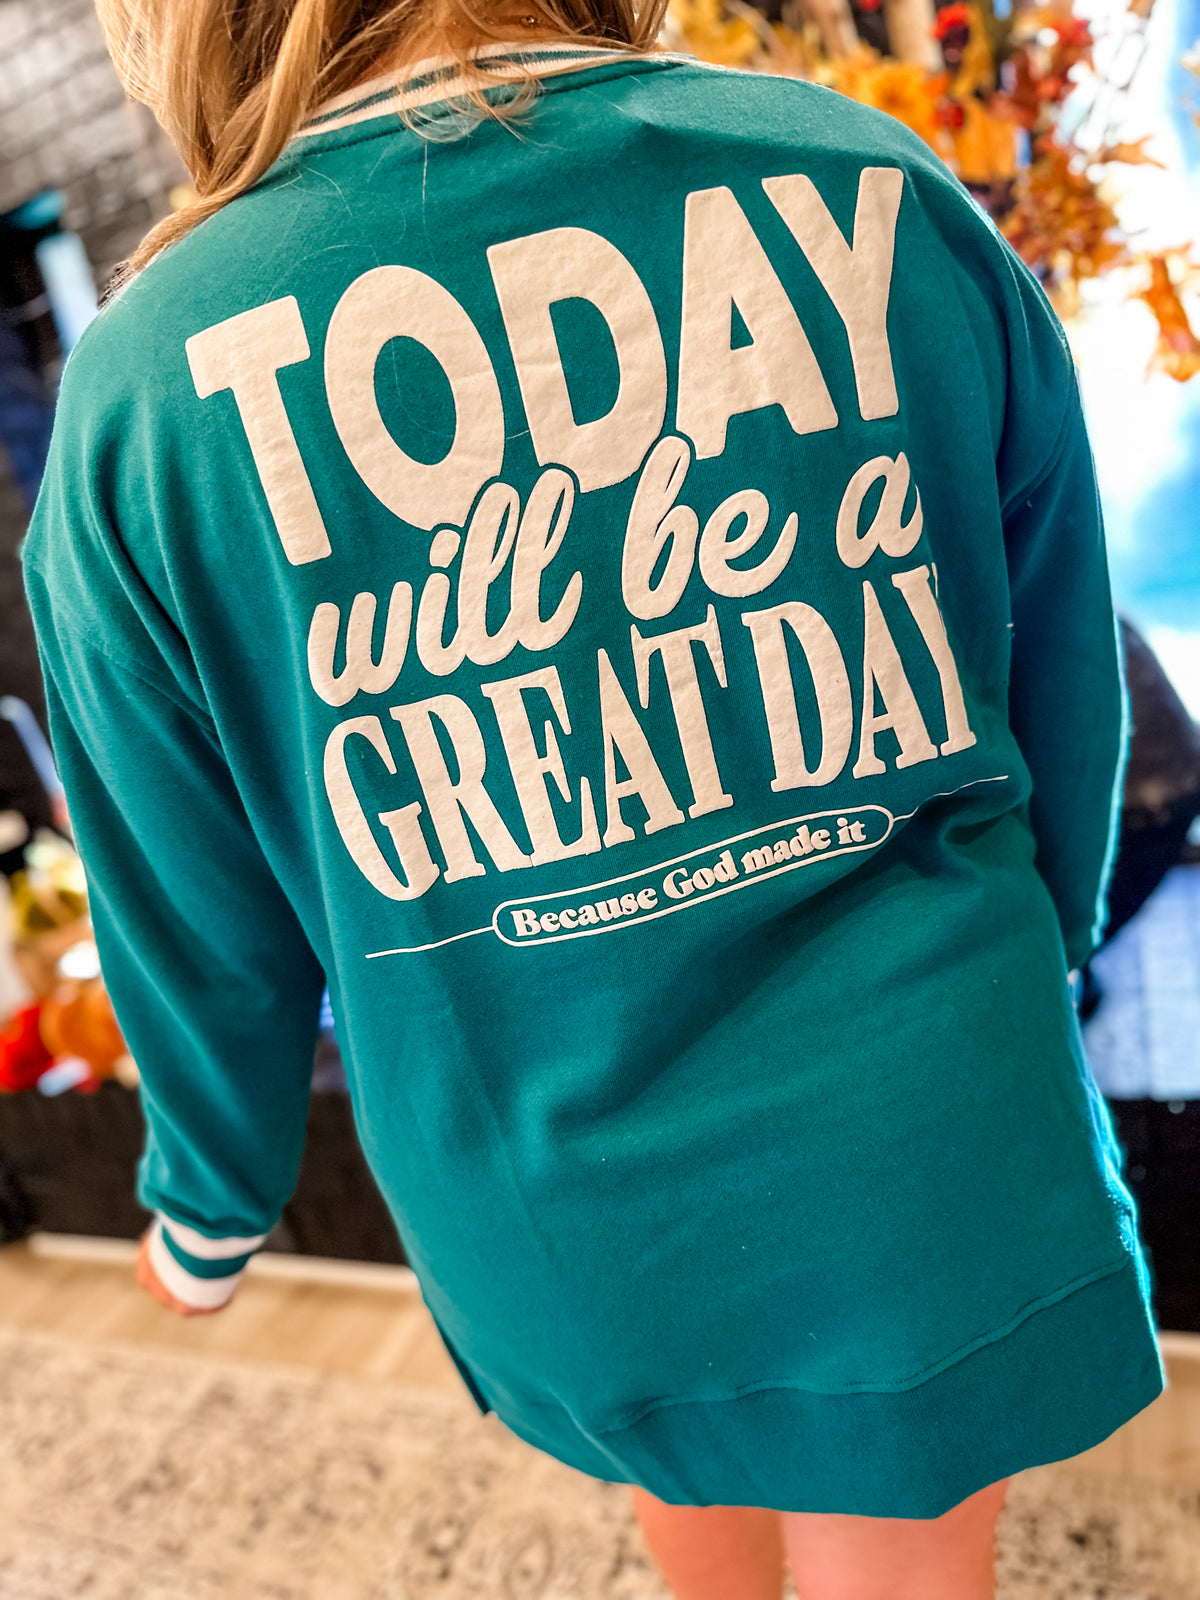 Today Will Be Great Day Sweatshirt